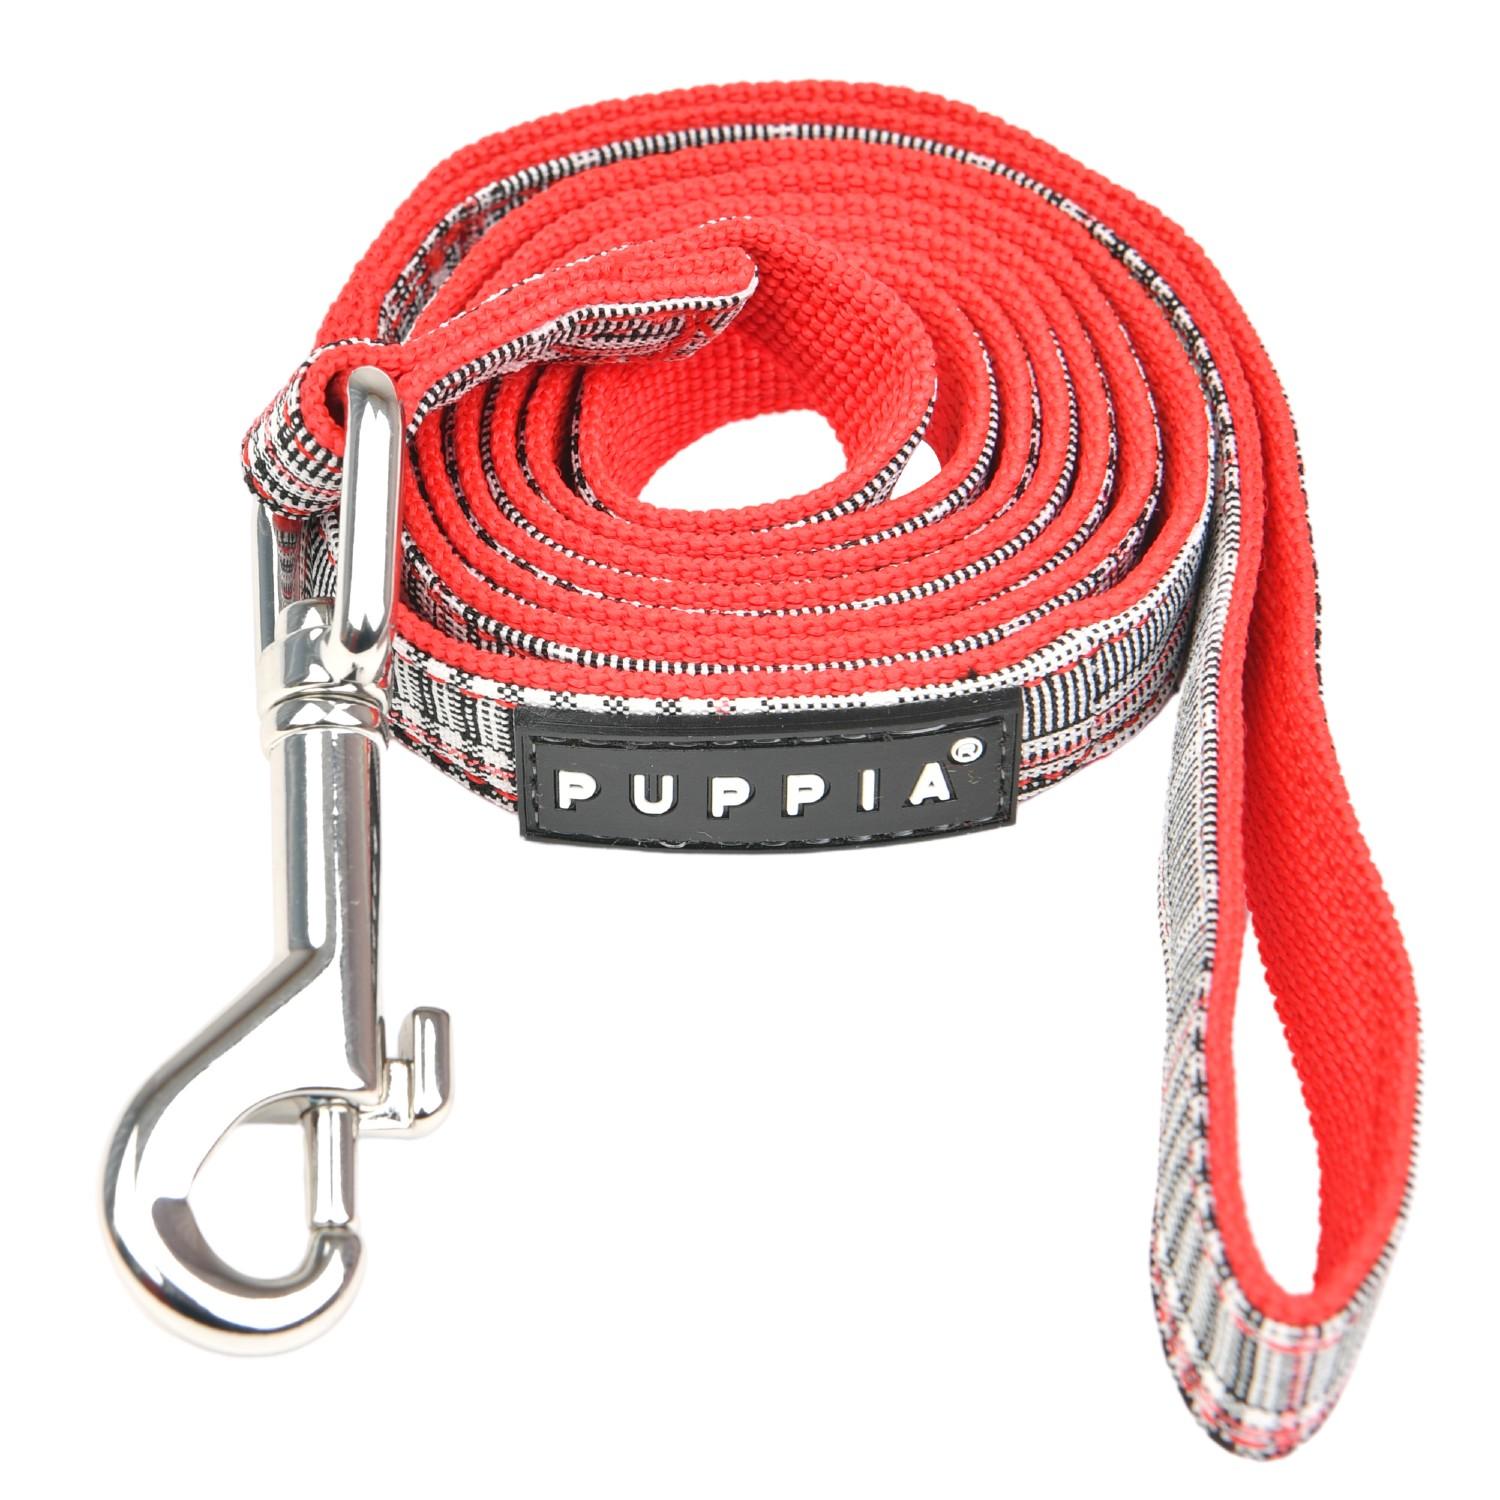 Blake Dog Leash by Puppia - Red